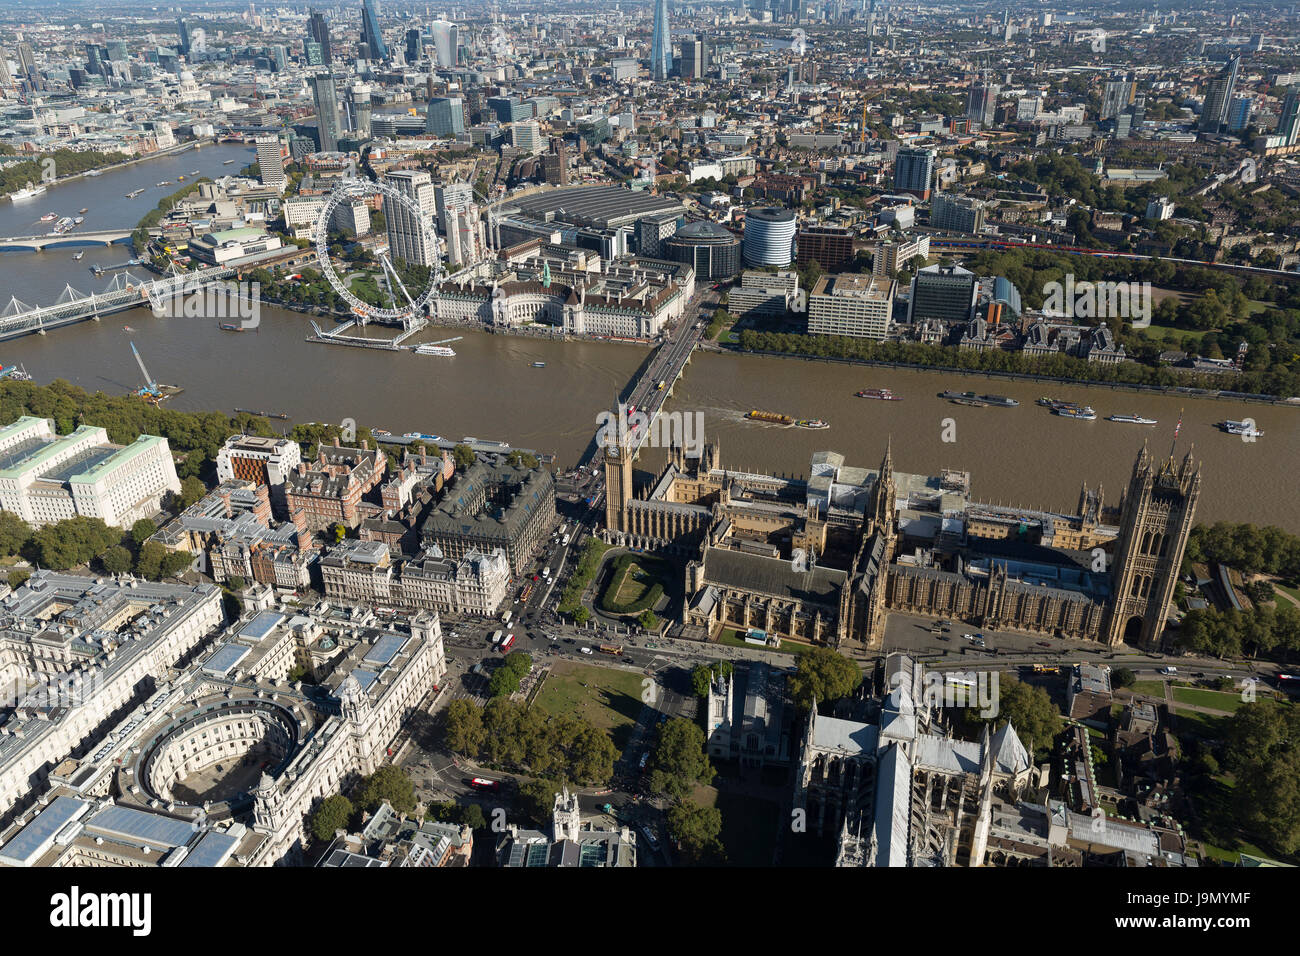 Aerial view of The Palace of Westminster currently covered in scaffolding undergoing repairs. Commonly known as the Houses of Parliament, London, UK Stock Photo